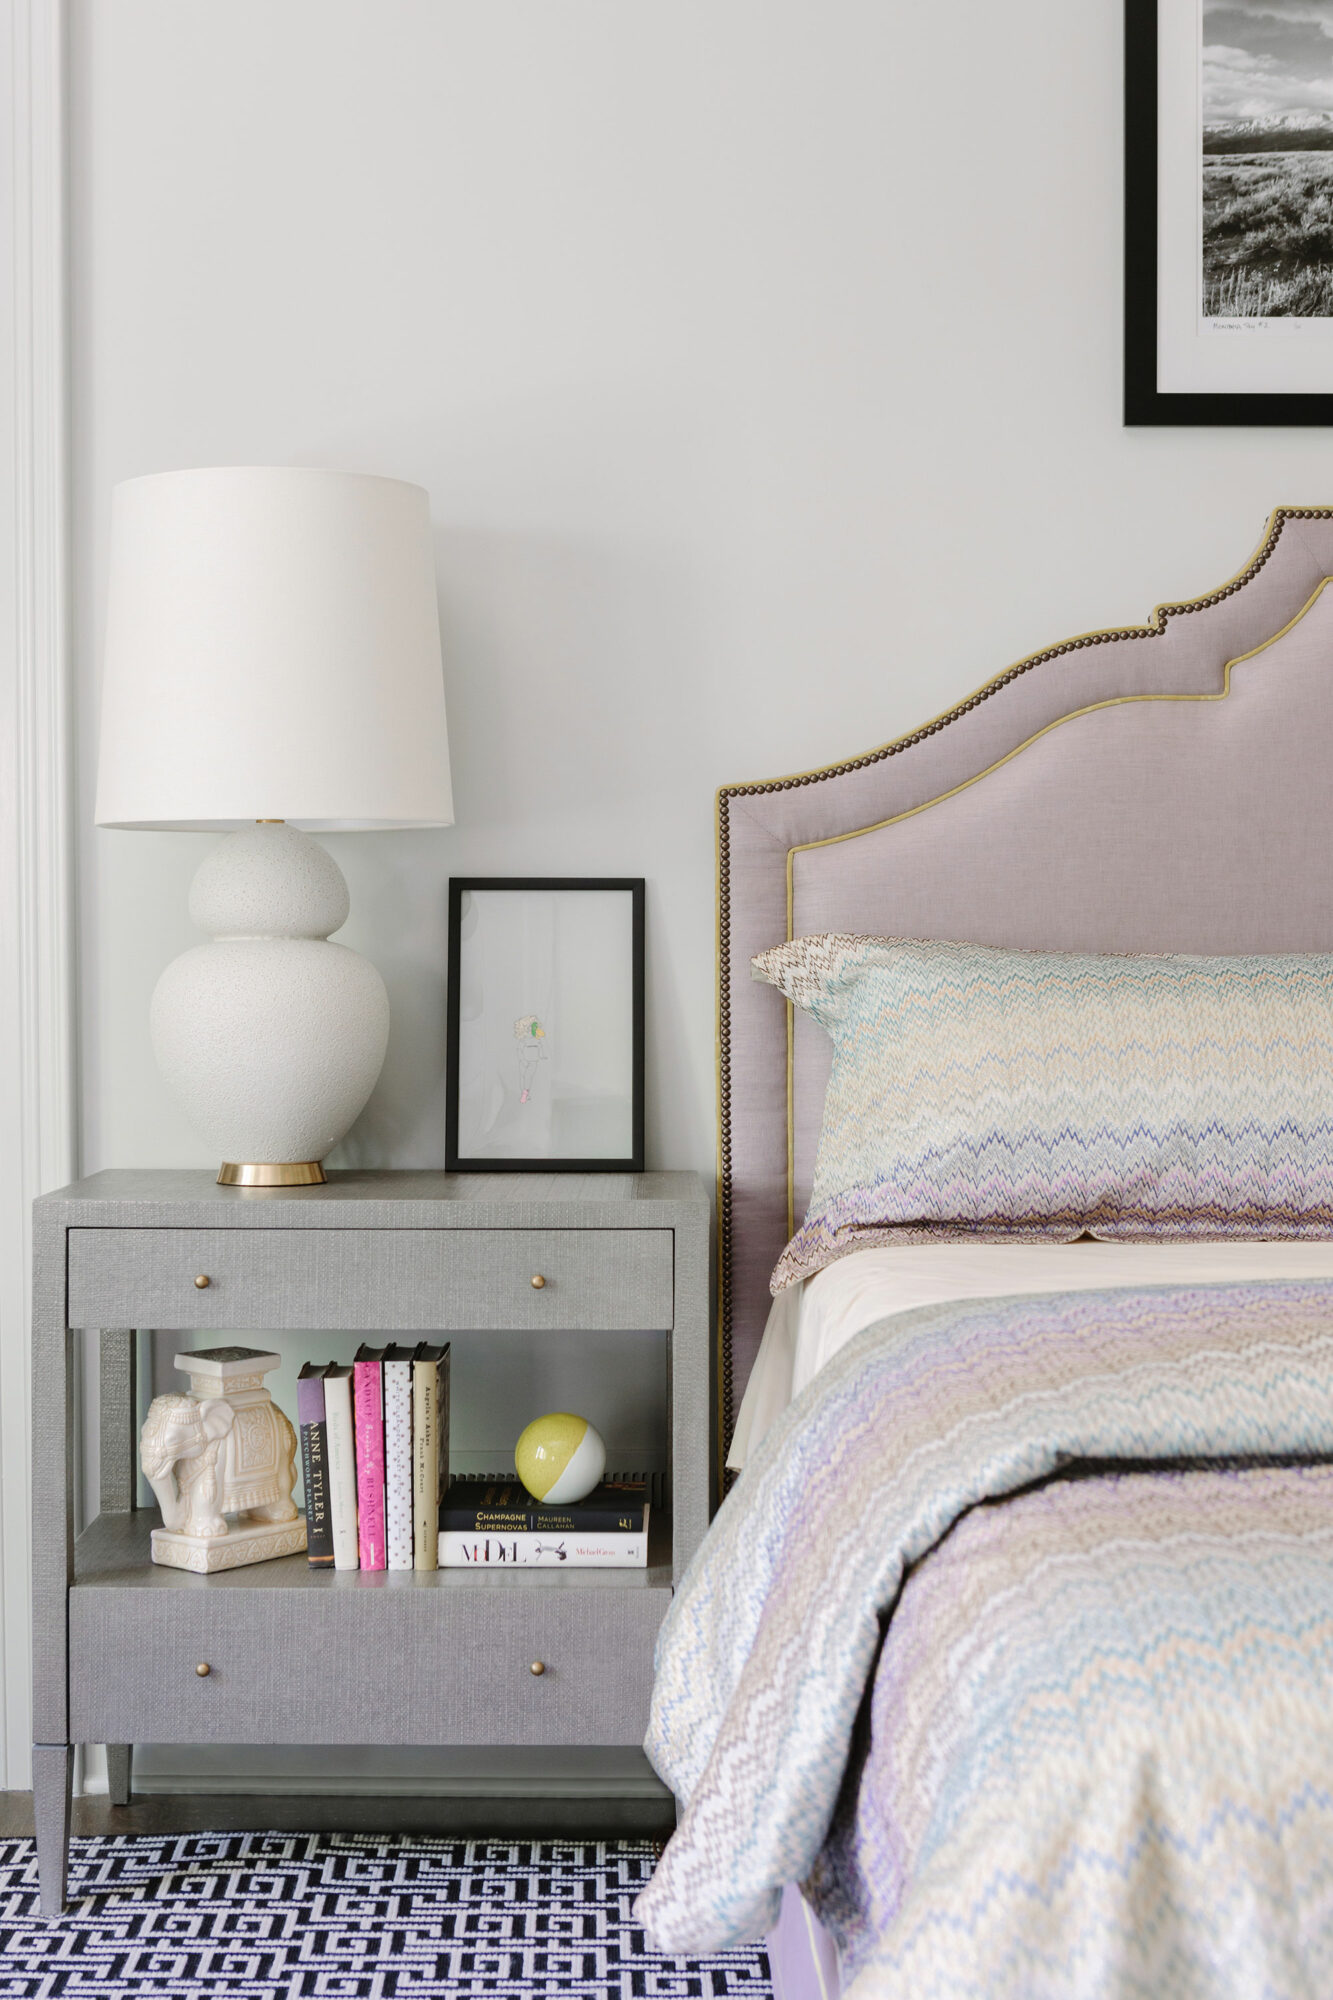 A white bedroom with a lavender upholstered bed dressed in pastel linens.